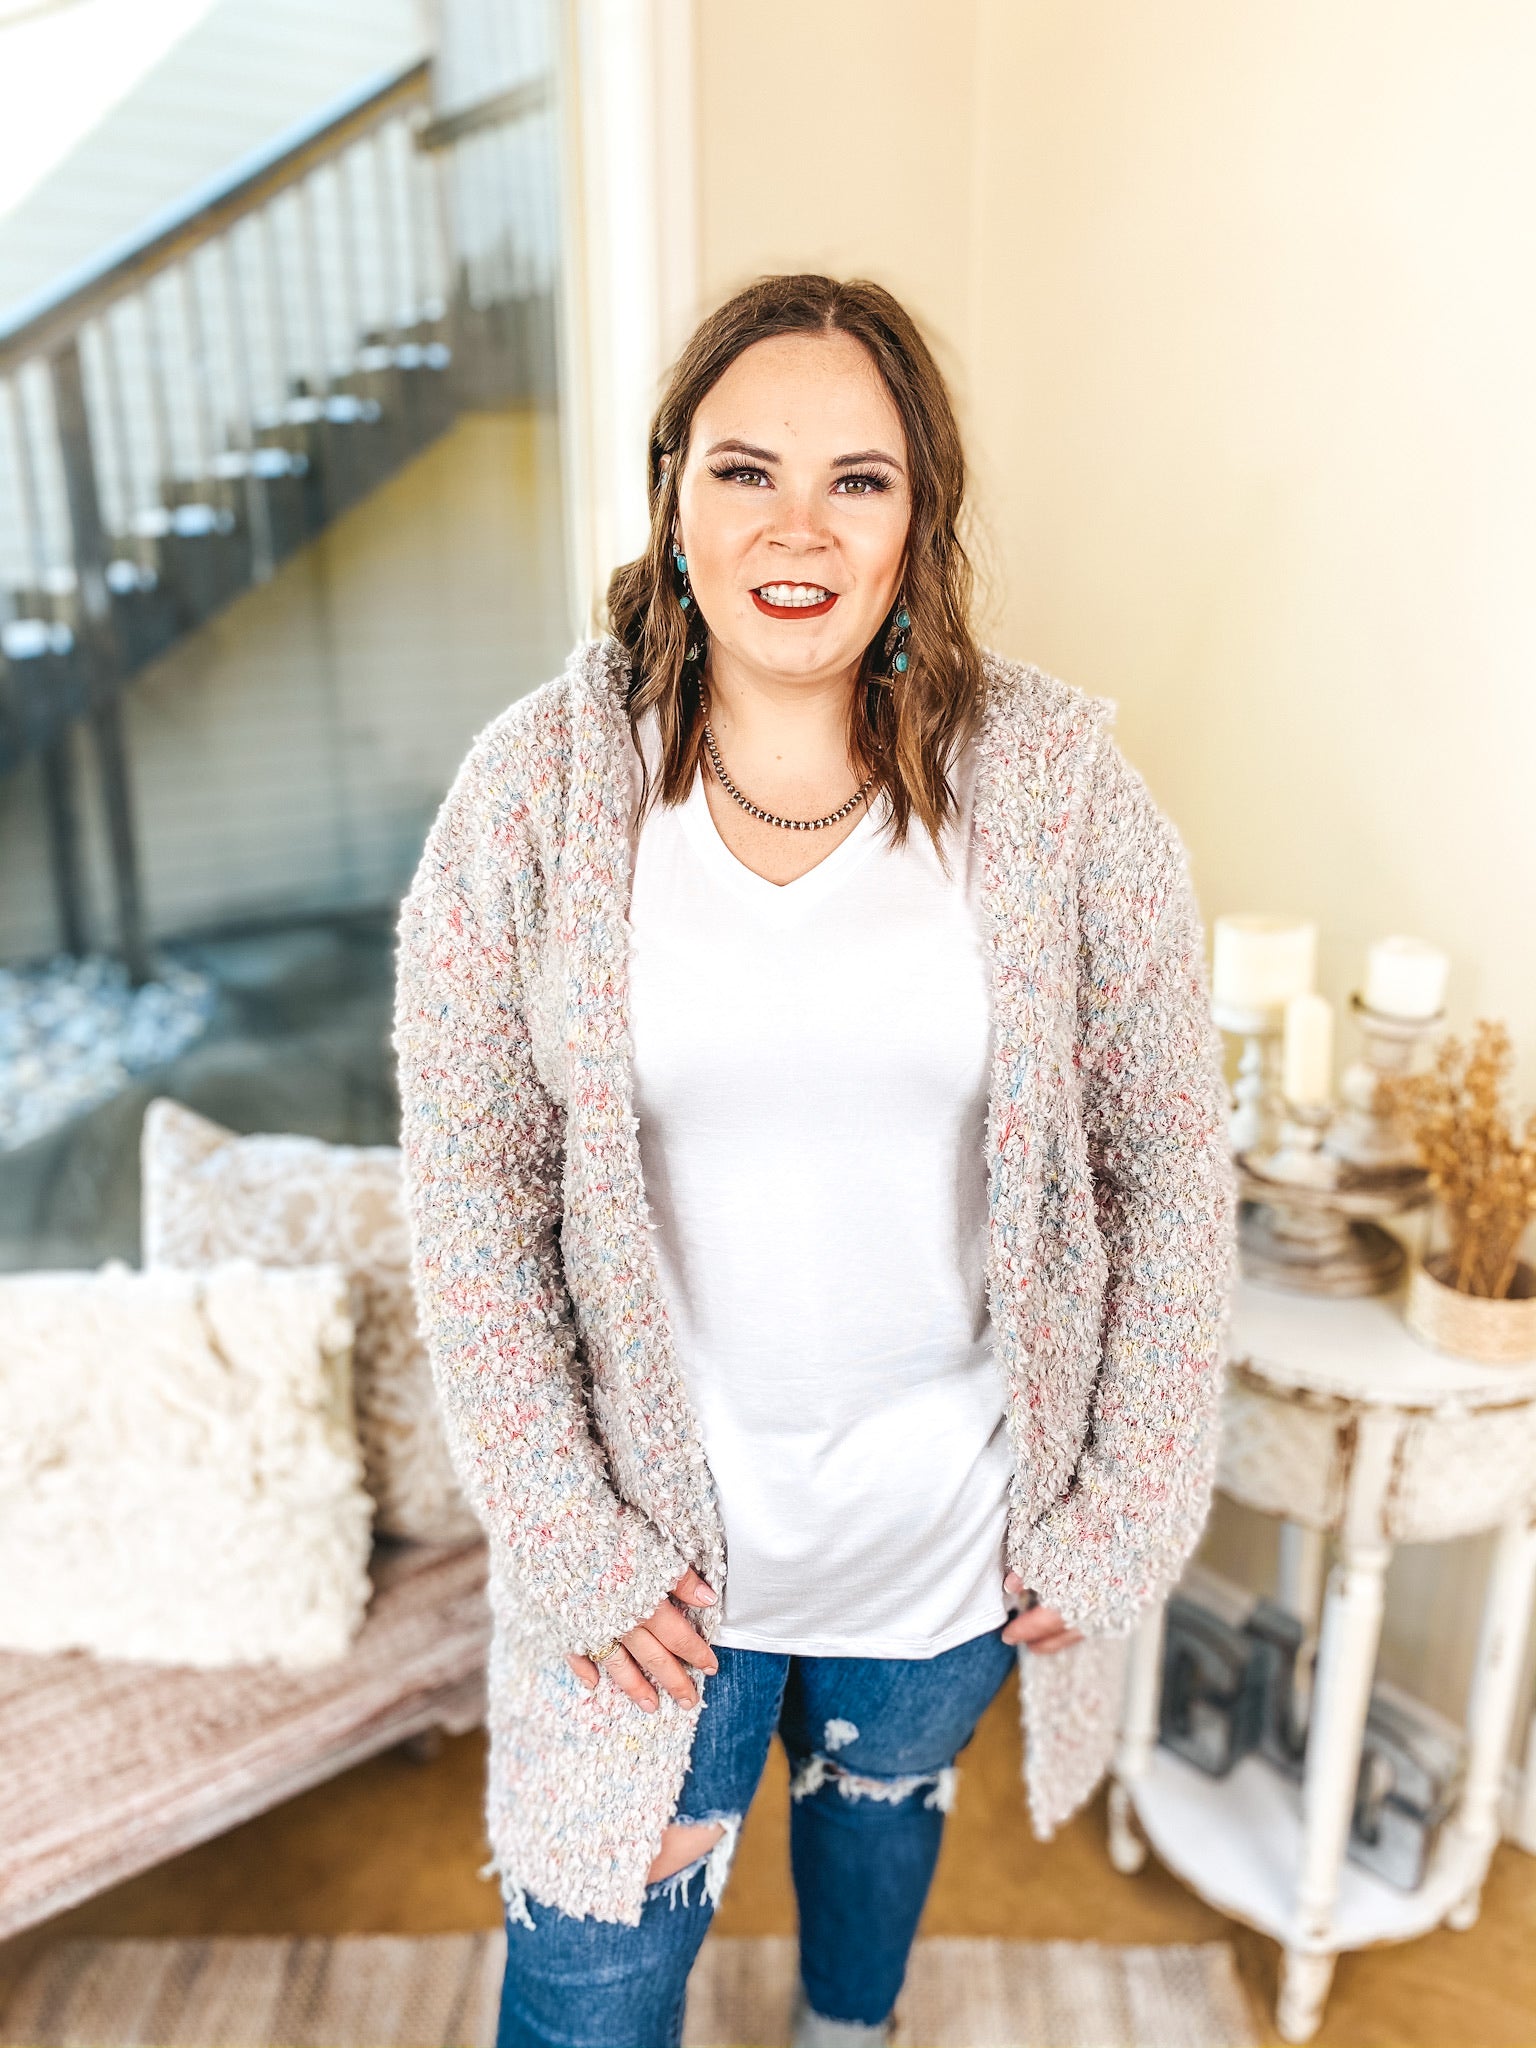 Cotton Candy Dreams Hooded Cardigan with Multi Stitching in Grey - Giddy Up Glamour Boutique